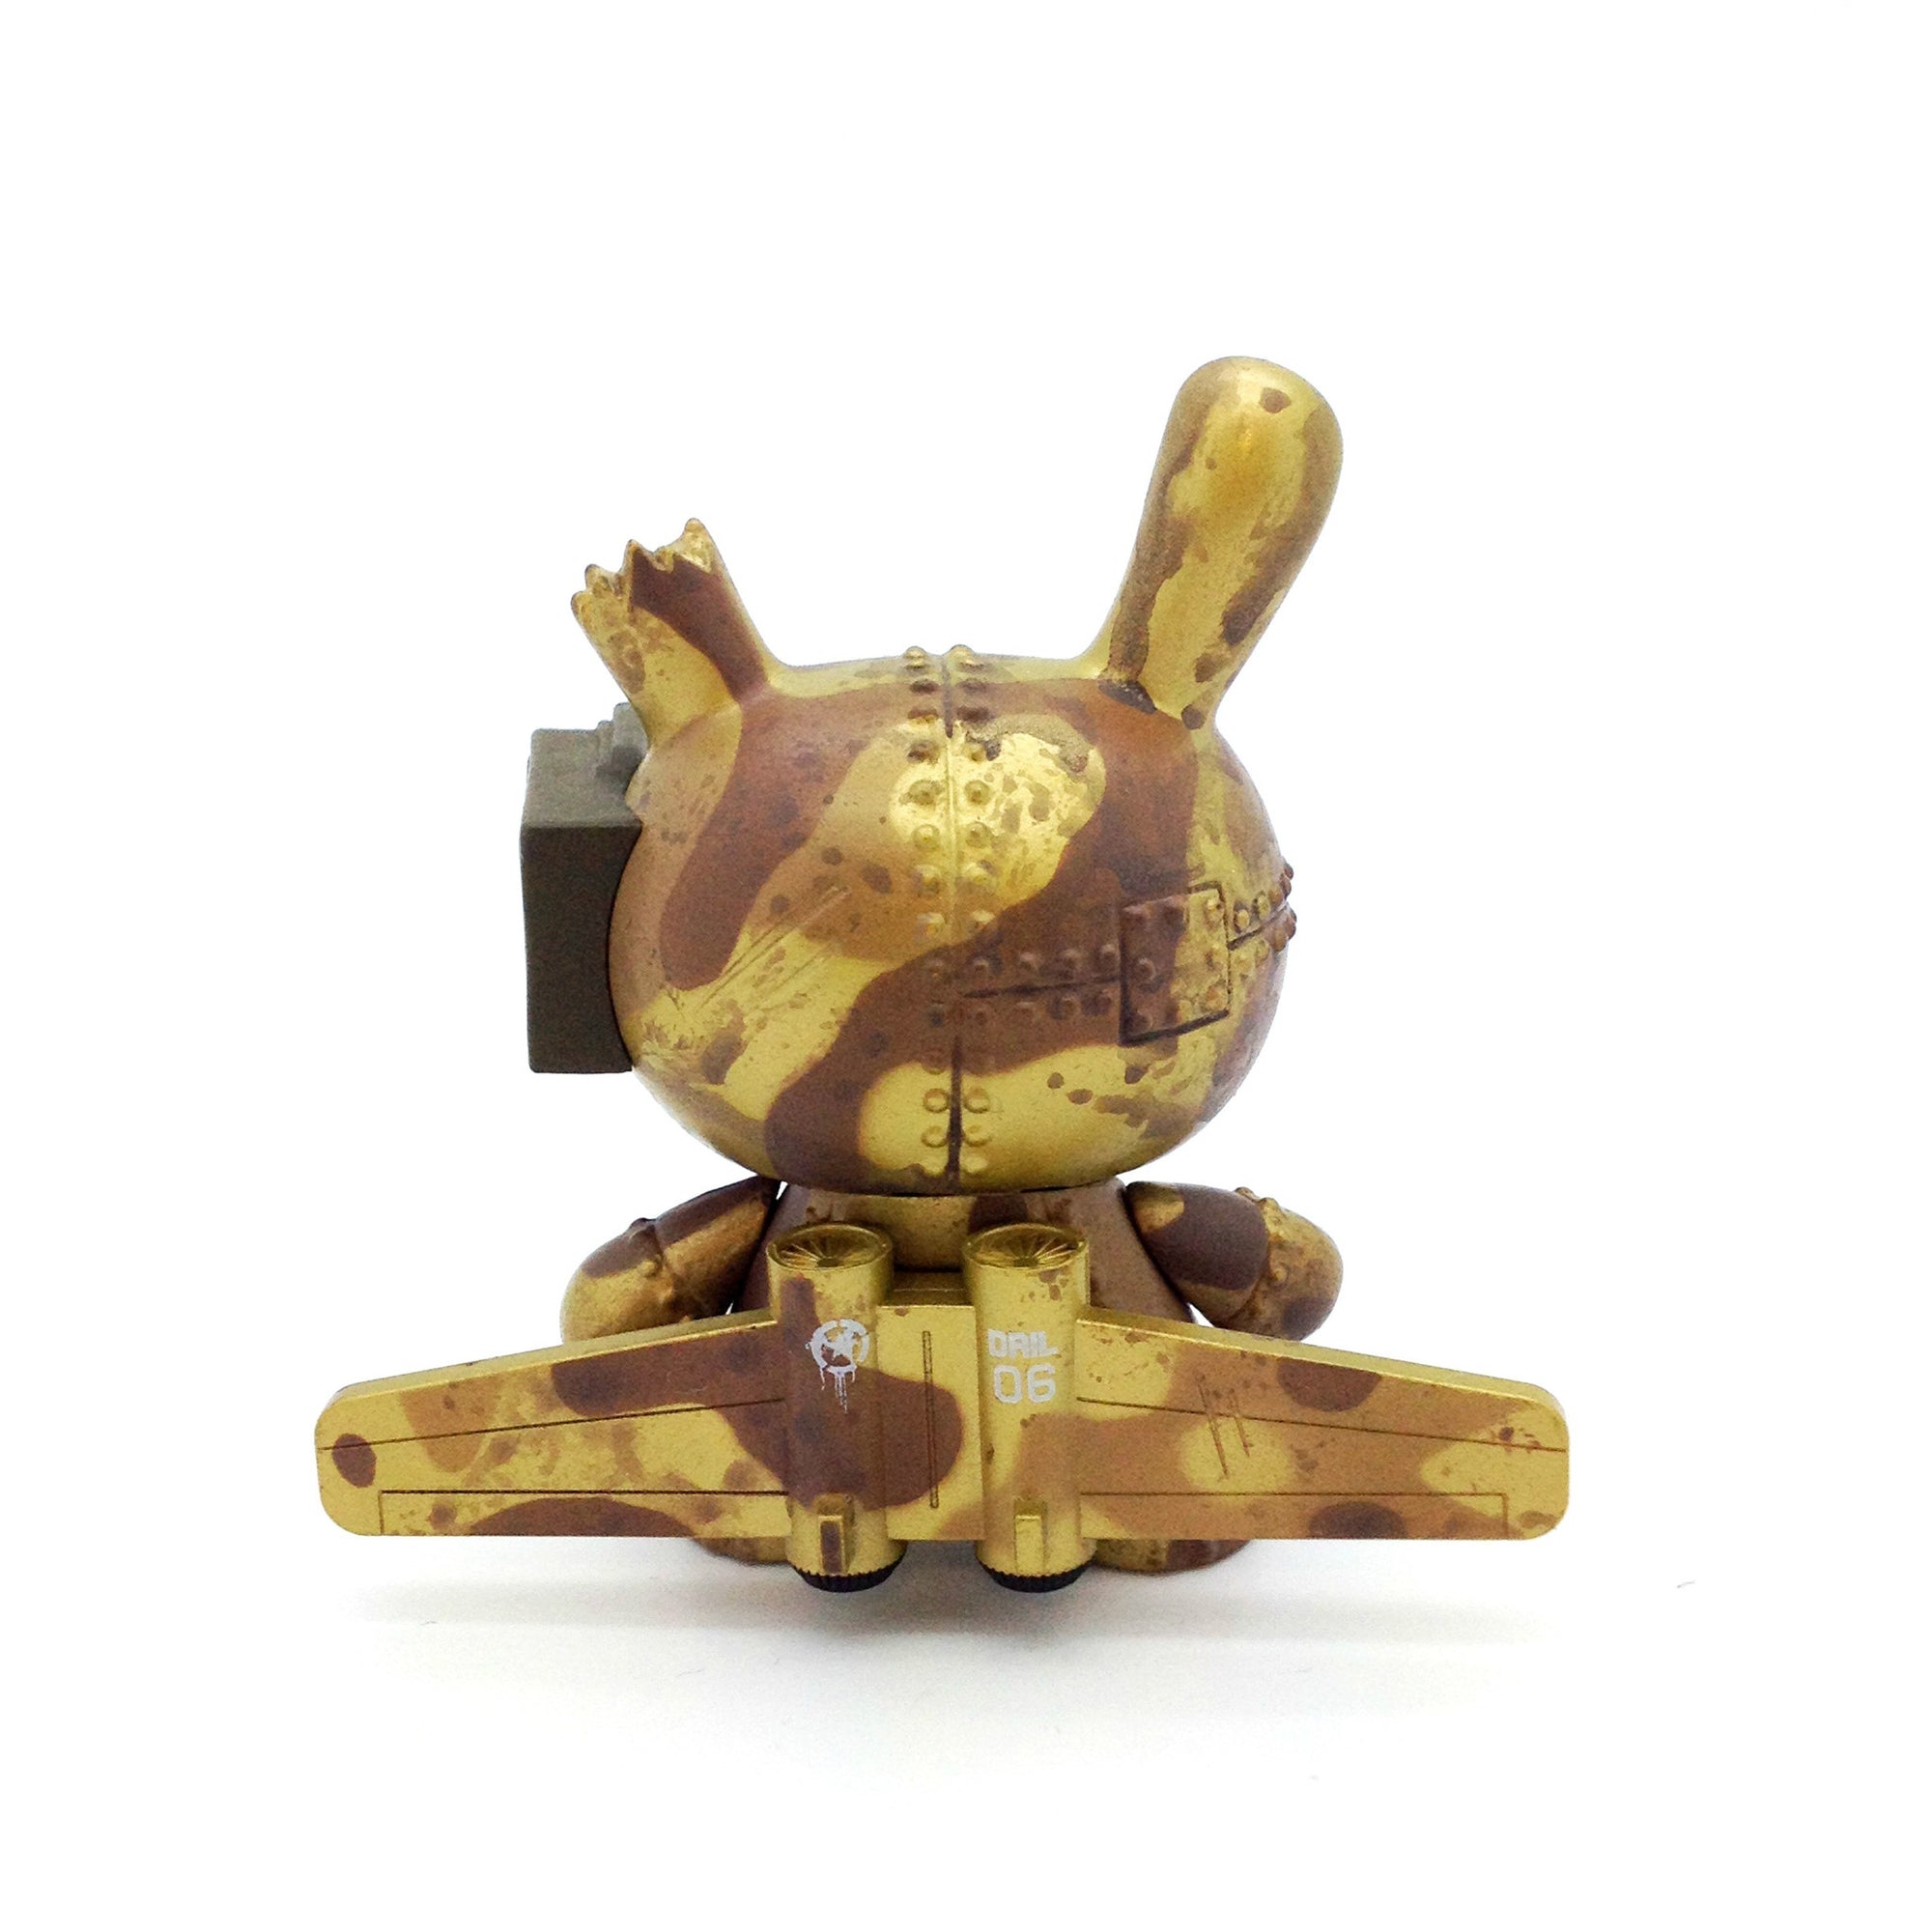 Art of War Dunny Series - Tank Destroyer by DrilOne (Case Exclusive) - Mindzai
 - 3